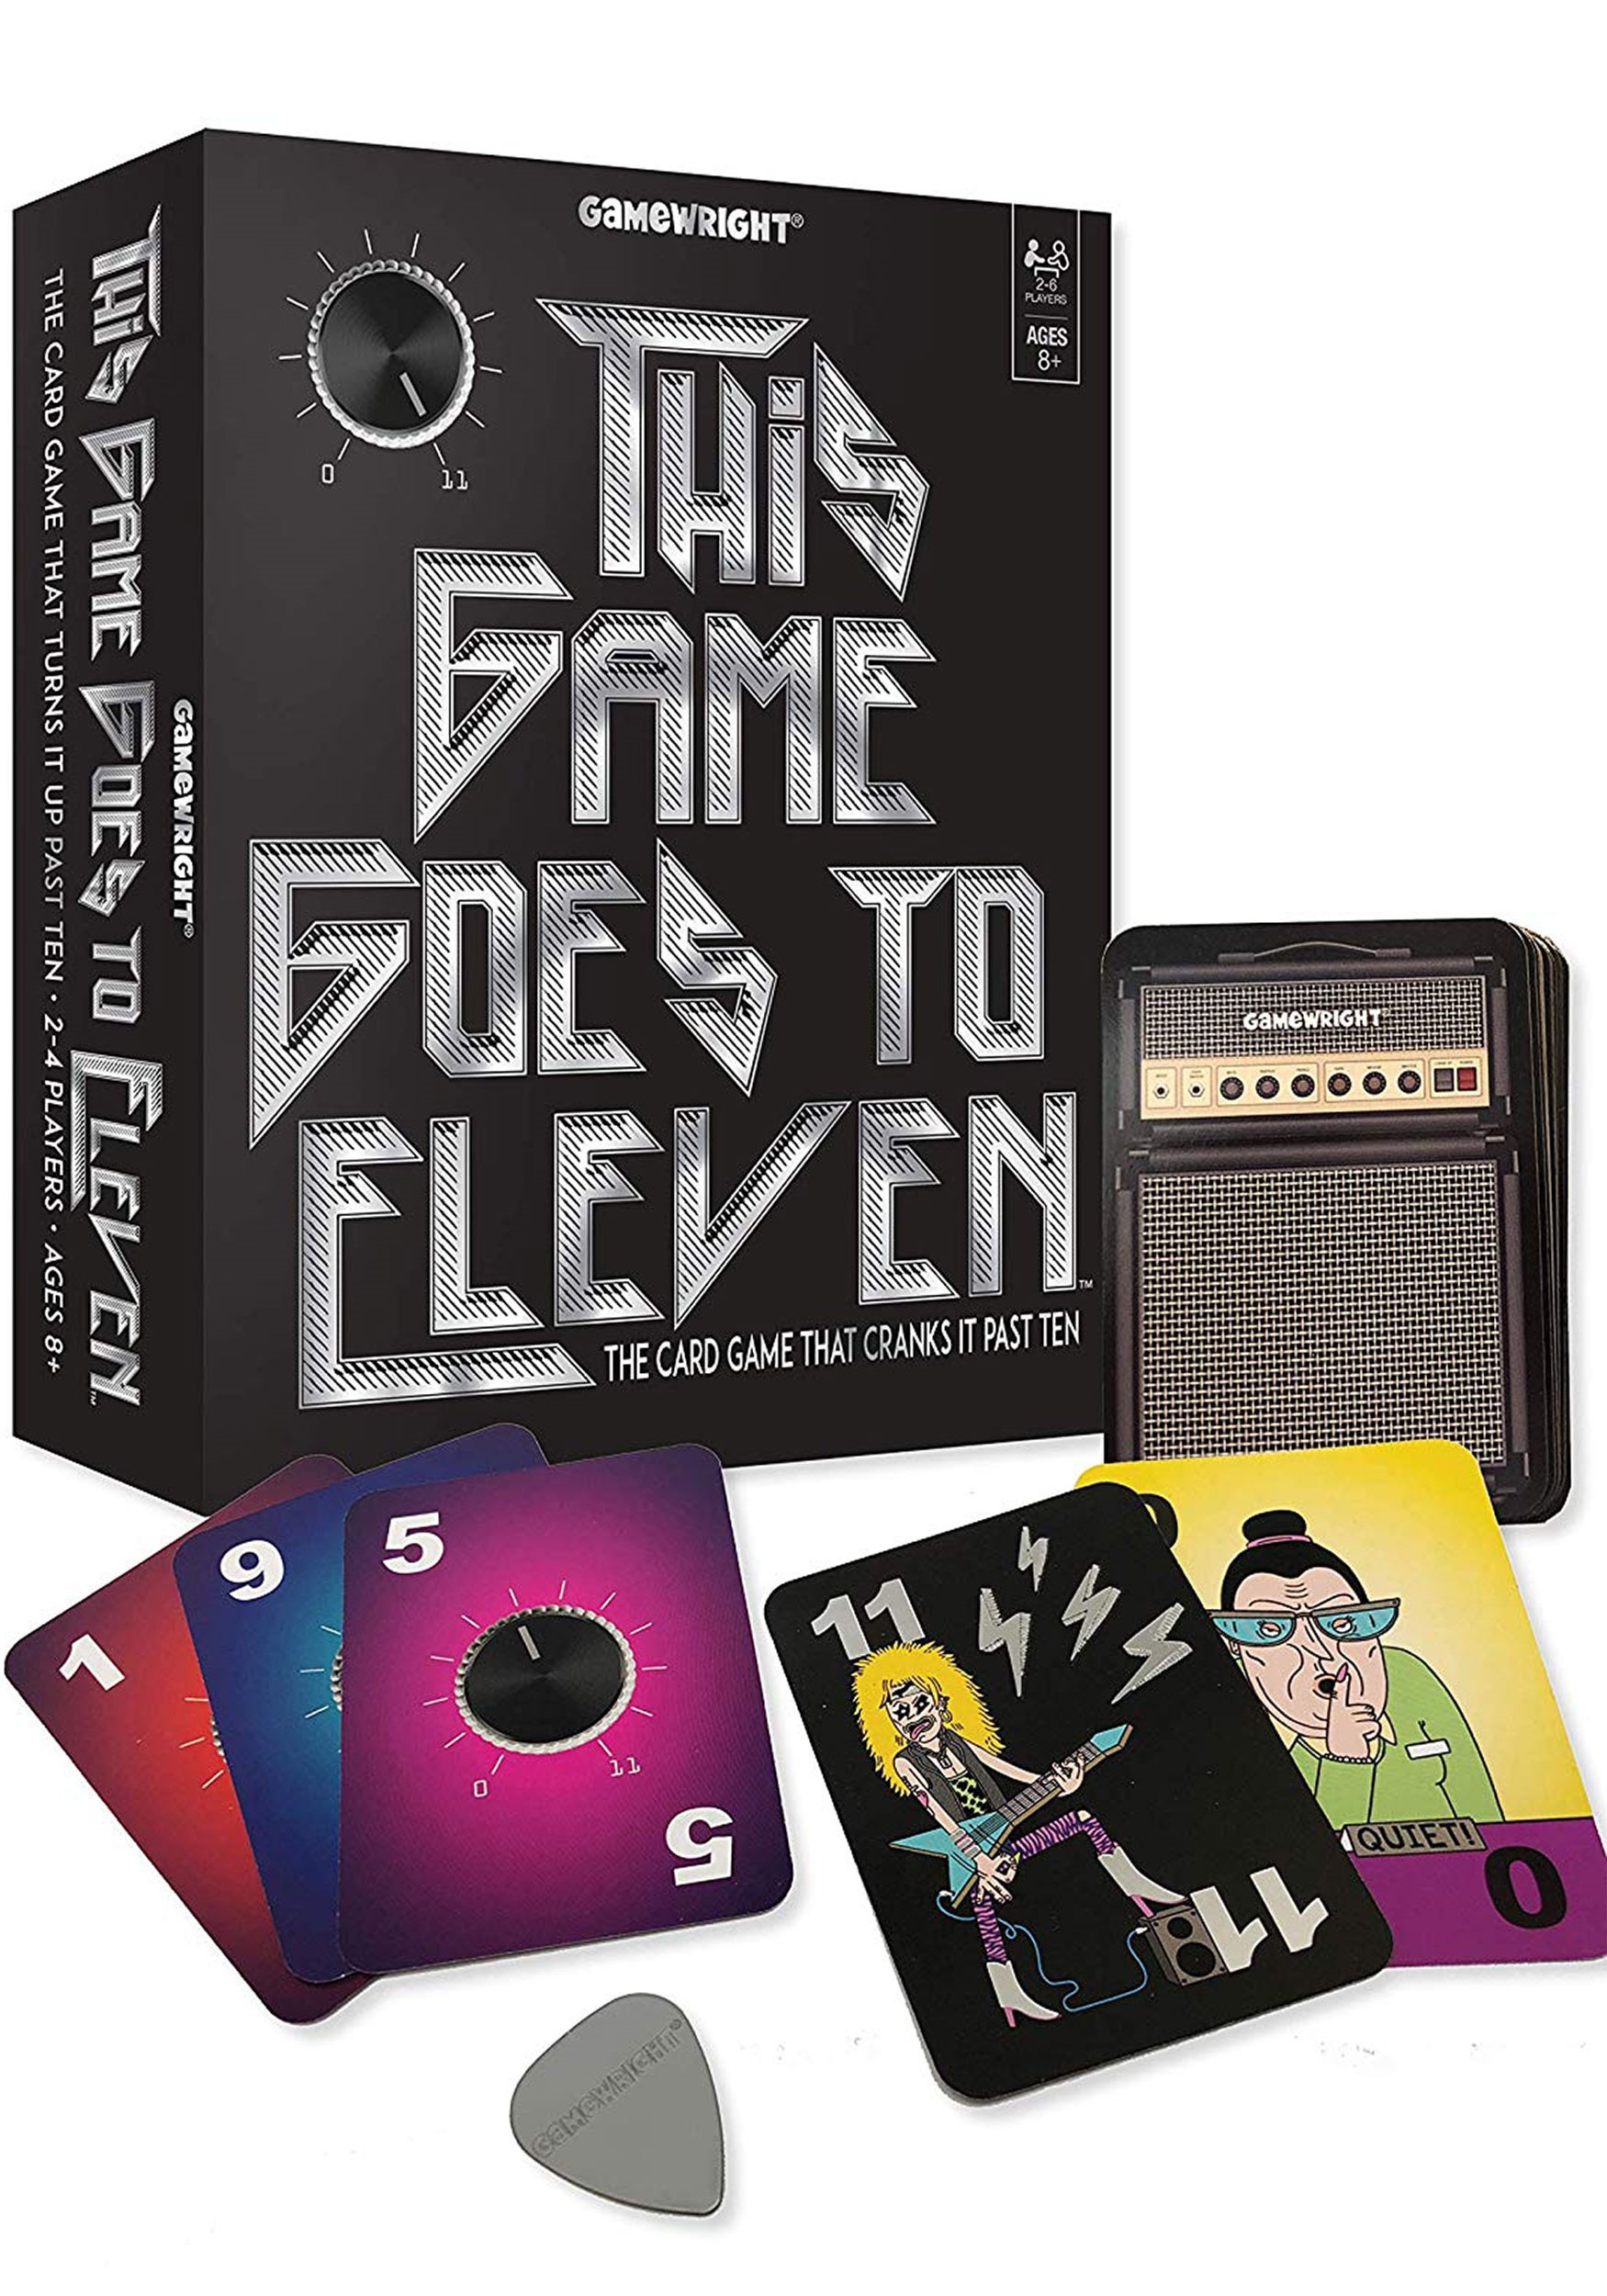 This Game Goes to Eleven- The Gamewright Card Game